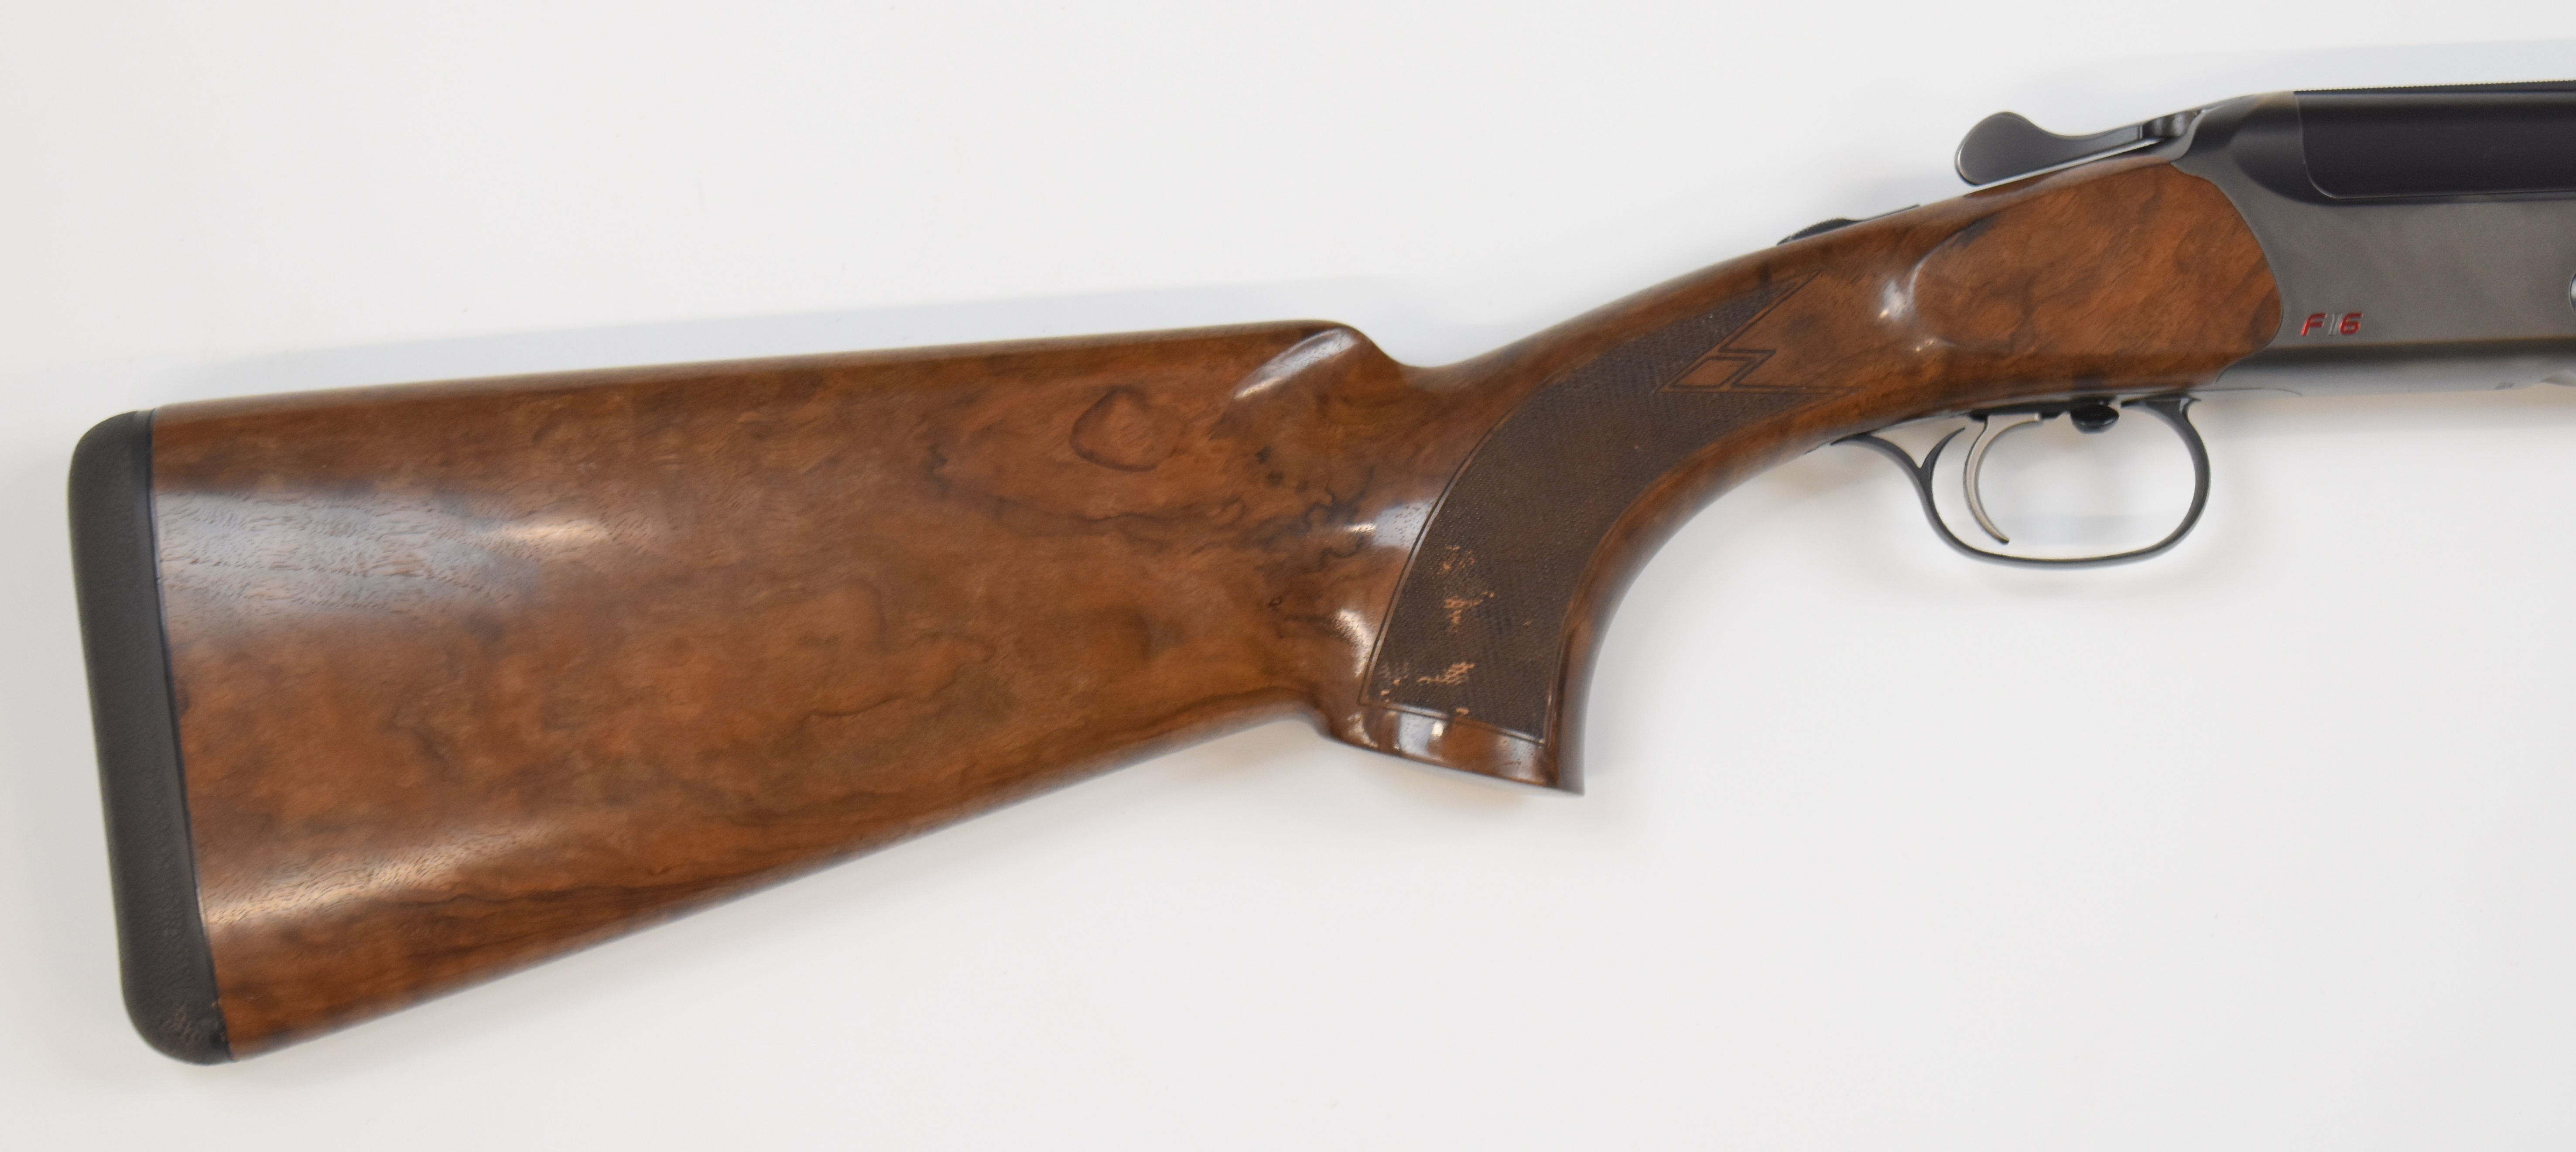 Blaser F16 12 bore over under ejector shotgun with named locks and underside, chequered semi- - Image 14 of 22